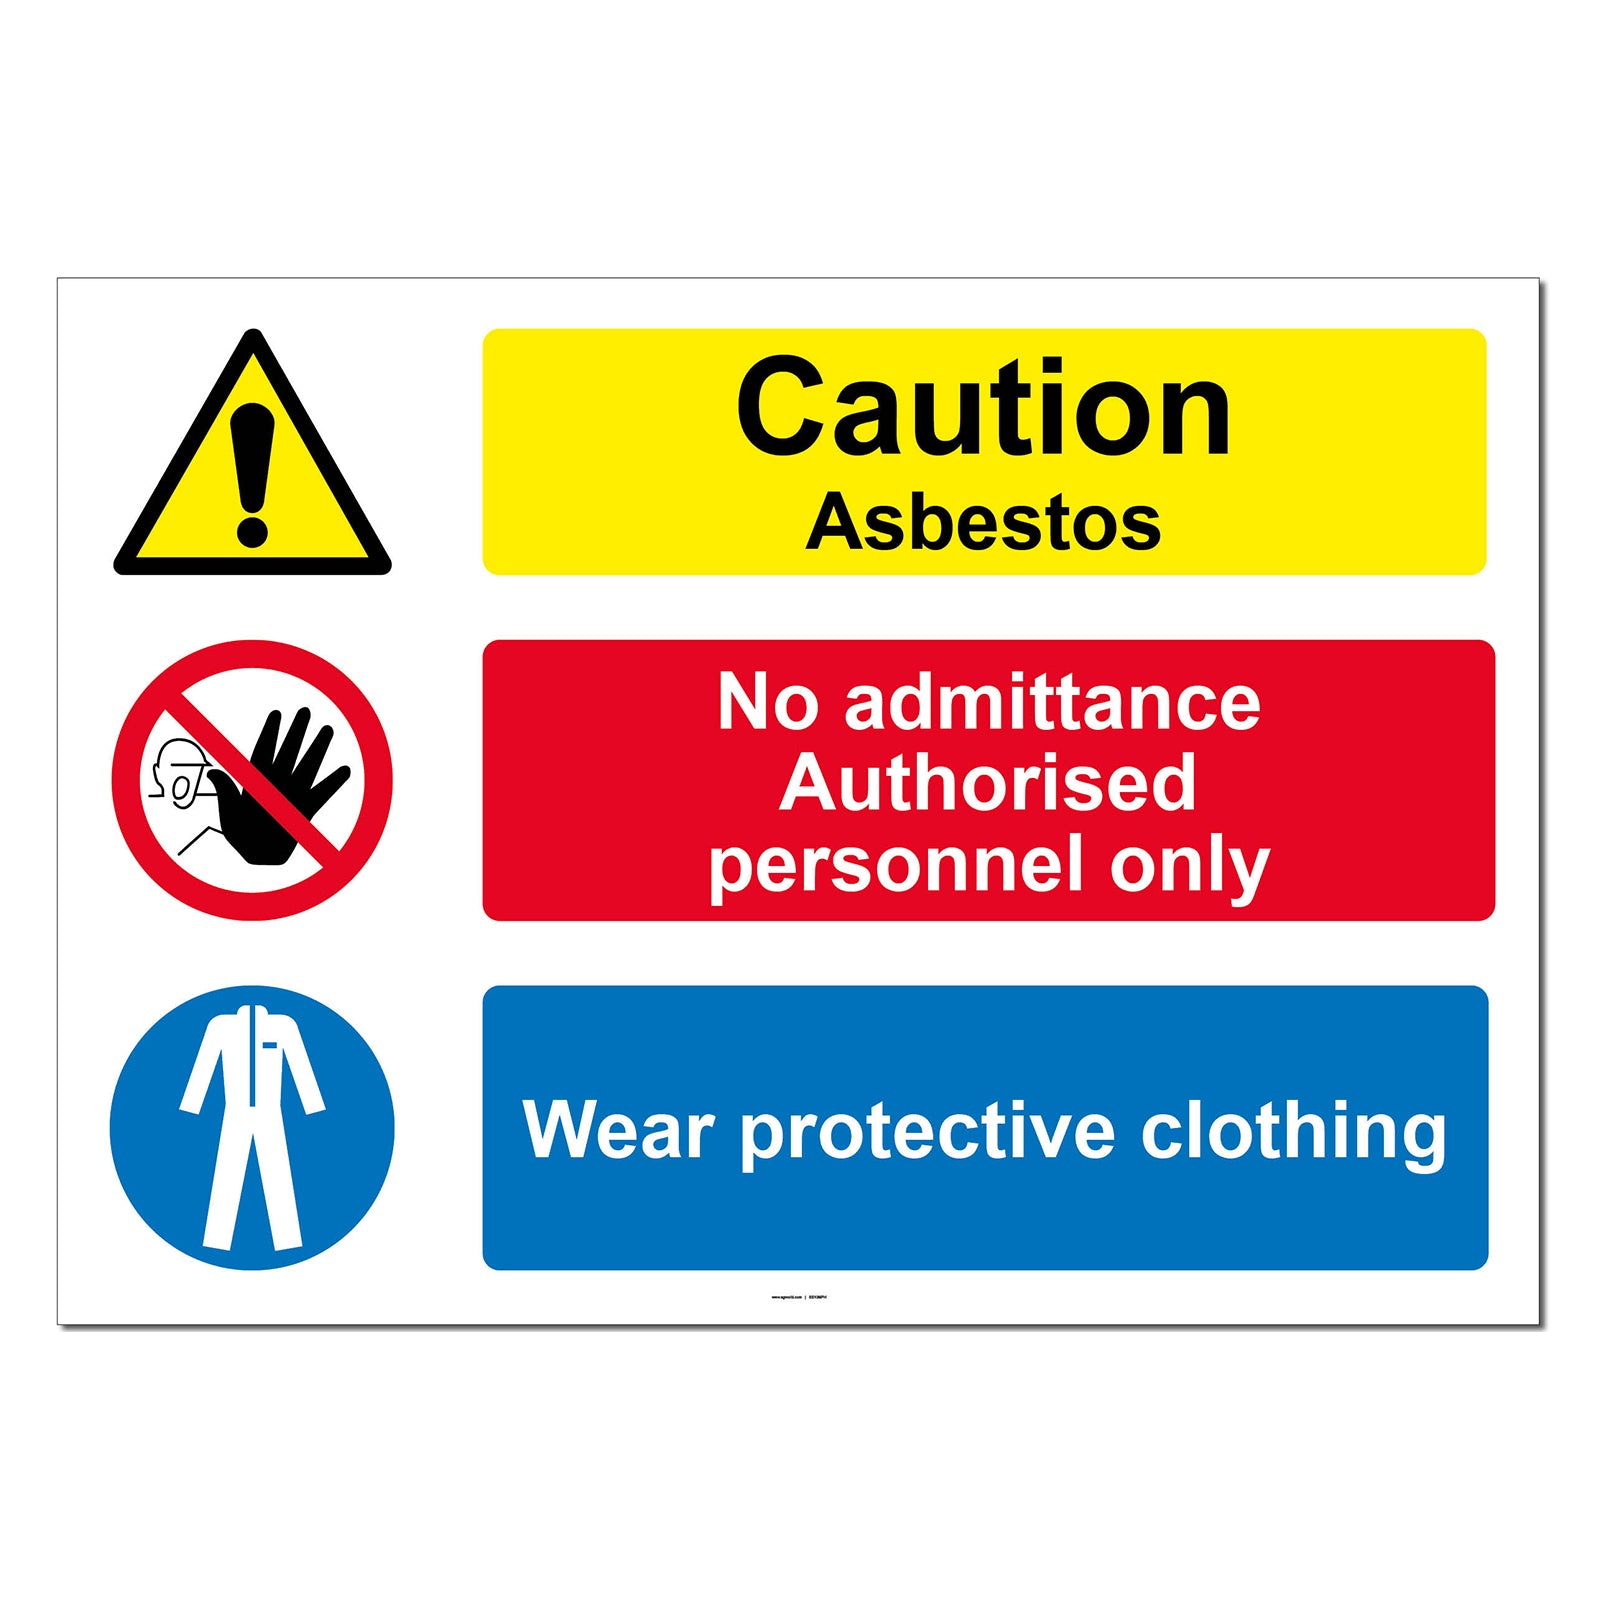 Caution Asbestos, No Admittance, Wear Protective Clothing Safety